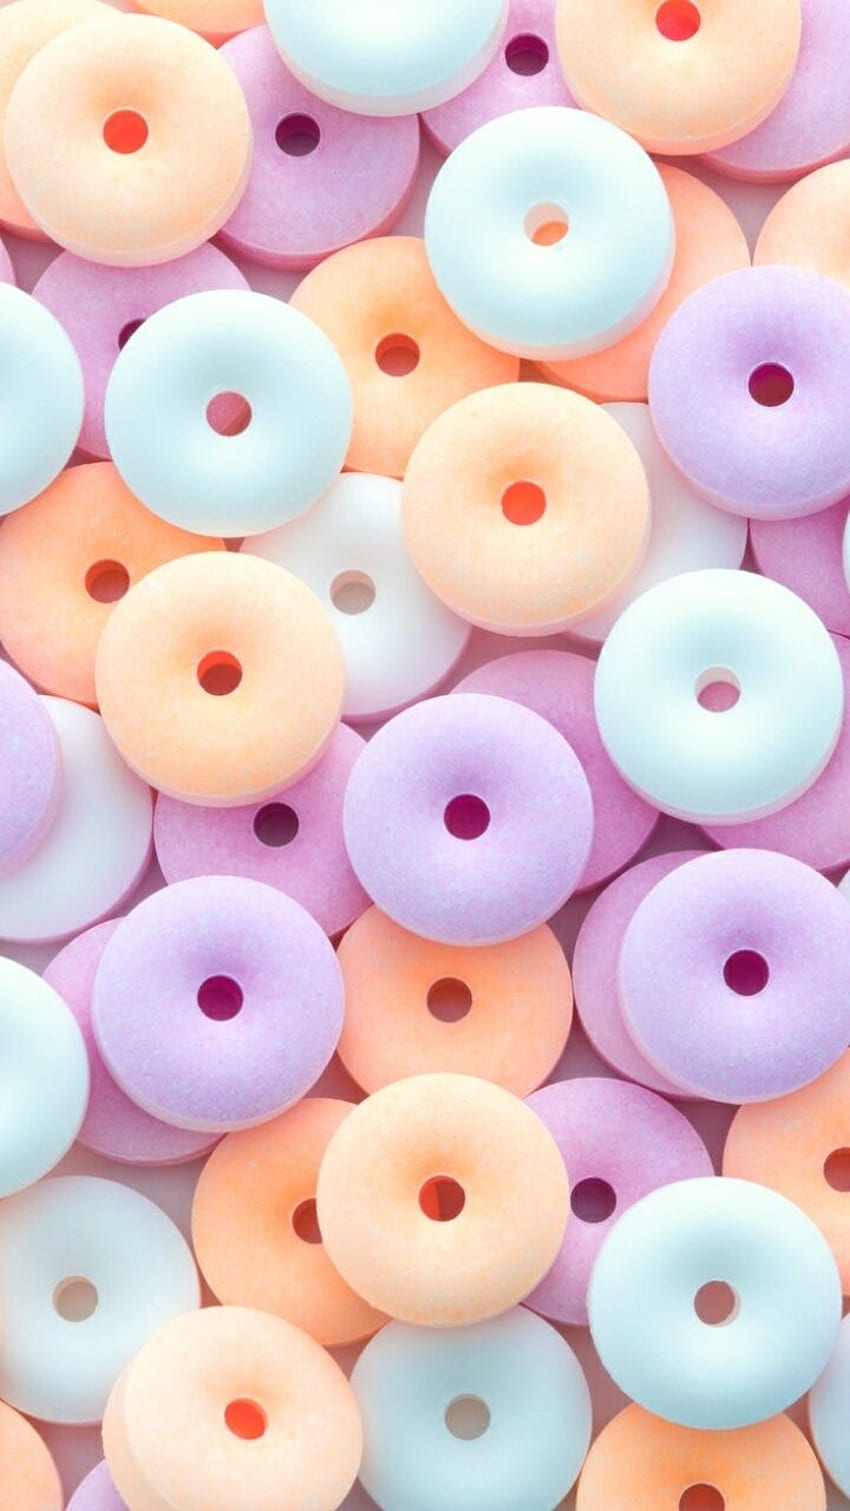 art, background, beautiful, beauty, colorful, decoration, delicious, donut, donuts, fashion, fashionable, food, food porn, inspiration, iphone, kawaii, luxury, pastel, pink, pretty, sweets, ,, Colorful Cute Donut HD phone wallpaper